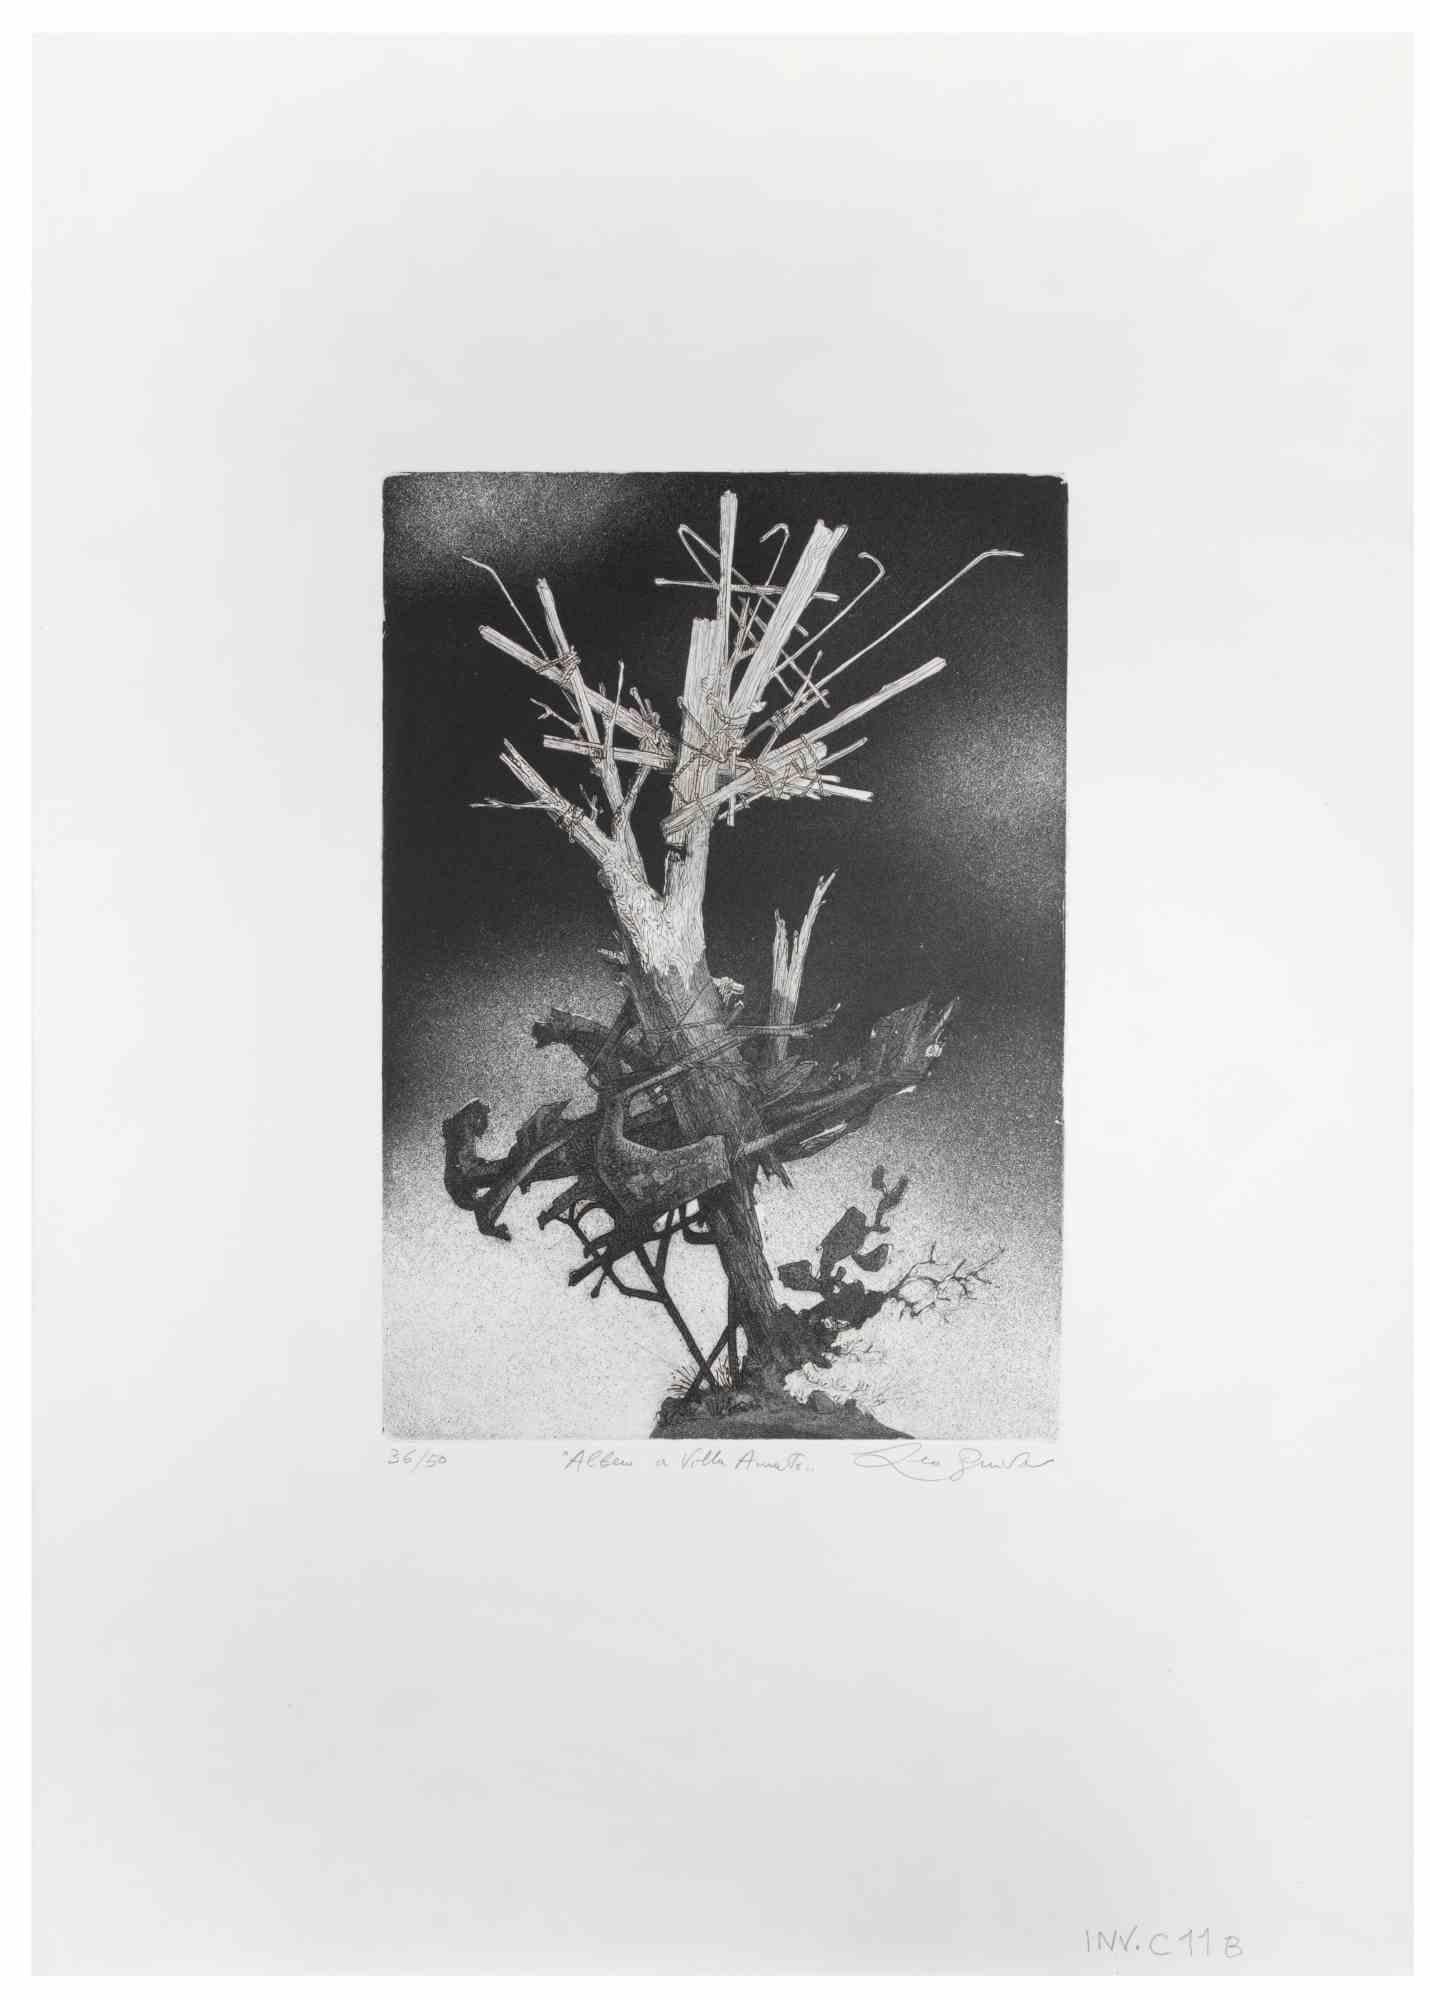 The Tree at Villa is an artwork realized by the Contemporary Italian artist  Leo Guida (1992 - 2017) in the 1970s.

Black and white etching on paper.

Hand Signed on the lower right margin, numbered edition of 50 prints, on the lower left margin.